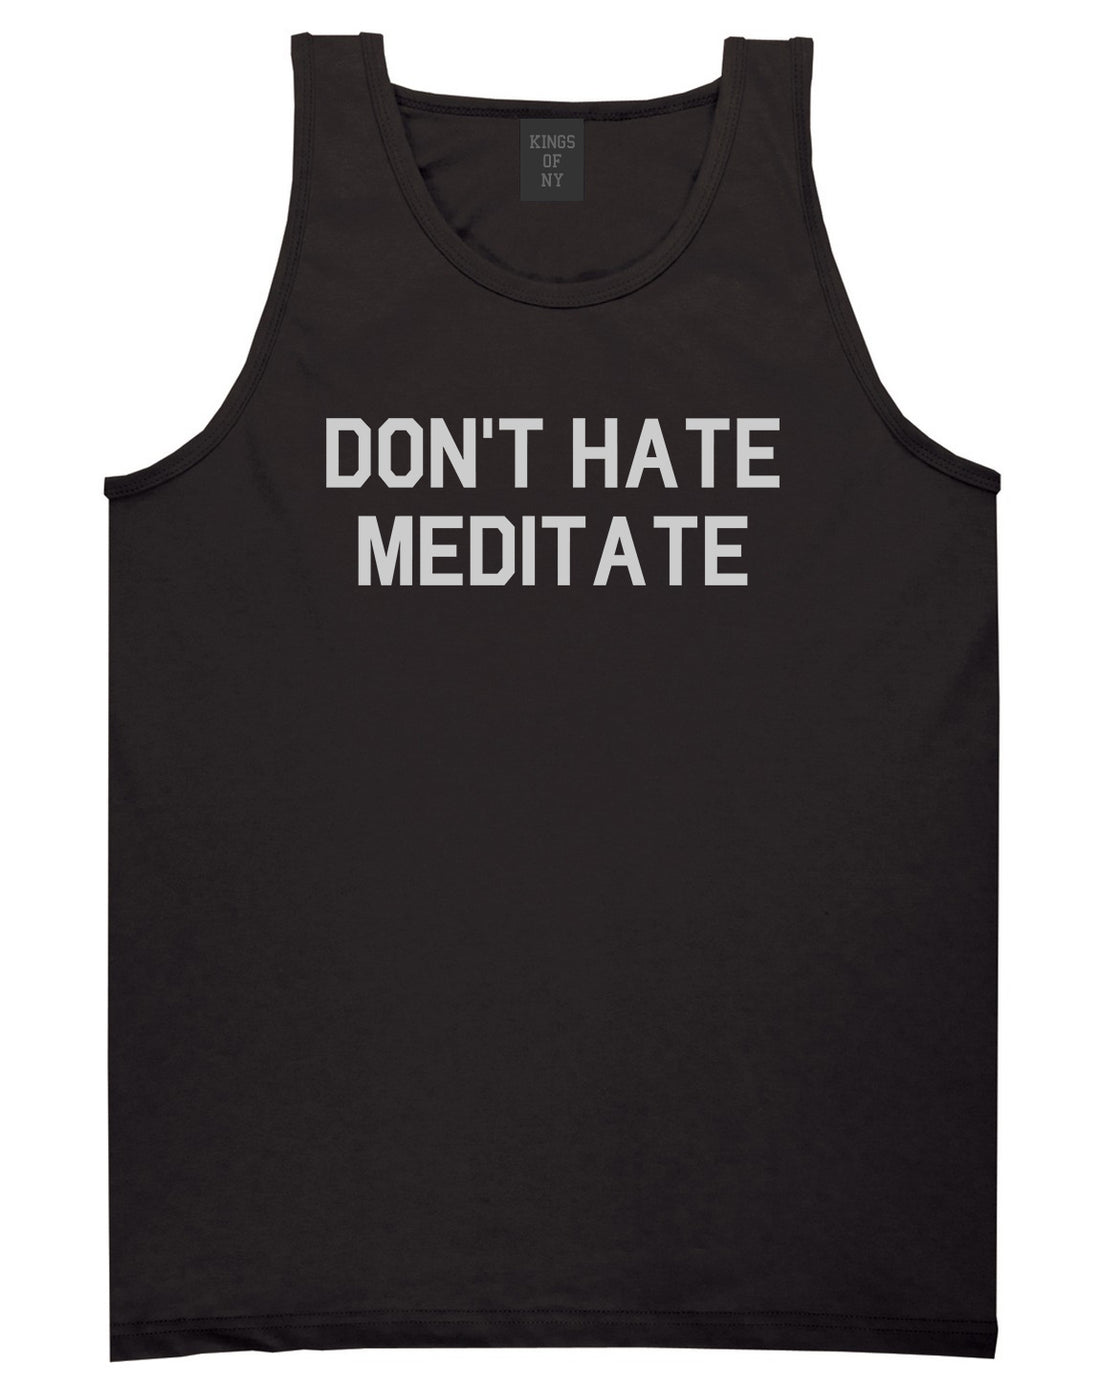 Dont_Hate_Meditate Mens Black Tank Top Shirt by Kings Of NY